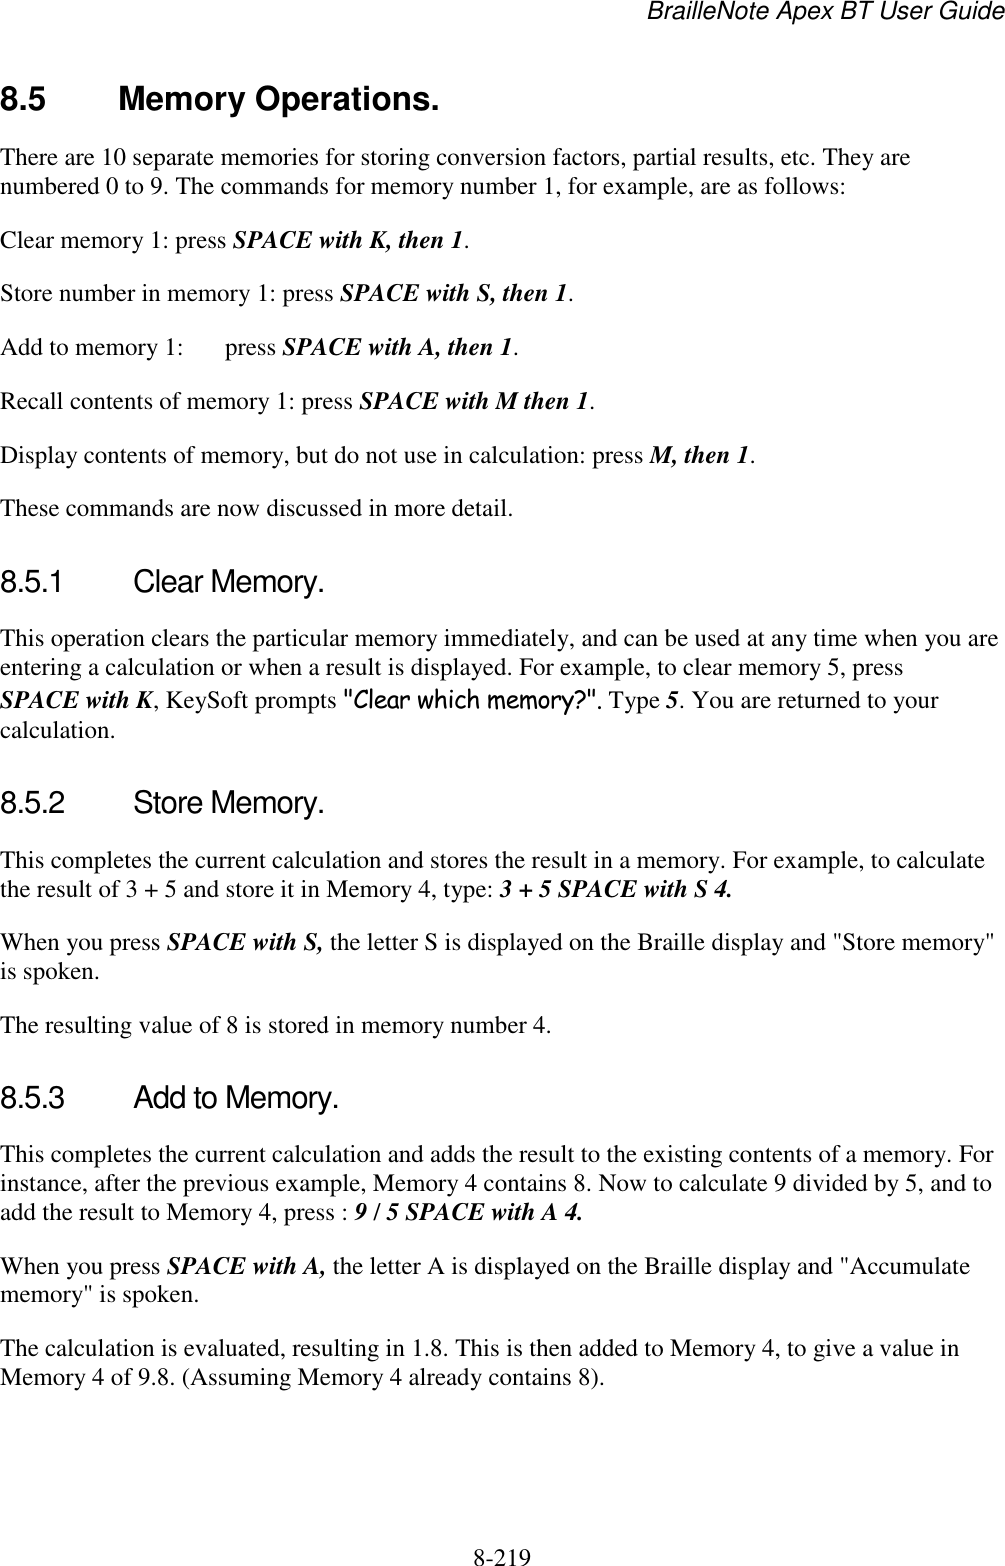 BrailleNote Apex BT User Guide   8-219   8.5  Memory Operations. There are 10 separate memories for storing conversion factors, partial results, etc. They are numbered 0 to 9. The commands for memory number 1, for example, are as follows: Clear memory 1: press SPACE with K, then 1. Store number in memory 1: press SPACE with S, then 1. Add to memory 1:  press SPACE with A, then 1. Recall contents of memory 1: press SPACE with M then 1. Display contents of memory, but do not use in calculation: press M, then 1. These commands are now discussed in more detail.  8.5.1  Clear Memory. This operation clears the particular memory immediately, and can be used at any time when you are entering a calculation or when a result is displayed. For example, to clear memory 5, press SPACE with K, KeySoft prompts &quot;Clear which memory?&quot;. Type 5. You are returned to your calculation.  8.5.2  Store Memory. This completes the current calculation and stores the result in a memory. For example, to calculate the result of 3 + 5 and store it in Memory 4, type: 3 + 5 SPACE with S 4.  When you press SPACE with S, the letter S is displayed on the Braille display and &quot;Store memory&quot; is spoken.  The resulting value of 8 is stored in memory number 4.   8.5.3  Add to Memory. This completes the current calculation and adds the result to the existing contents of a memory. For instance, after the previous example, Memory 4 contains 8. Now to calculate 9 divided by 5, and to add the result to Memory 4, press : 9 / 5 SPACE with A 4.  When you press SPACE with A, the letter A is displayed on the Braille display and &quot;Accumulate memory&quot; is spoken.  The calculation is evaluated, resulting in 1.8. This is then added to Memory 4, to give a value in Memory 4 of 9.8. (Assuming Memory 4 already contains 8).  